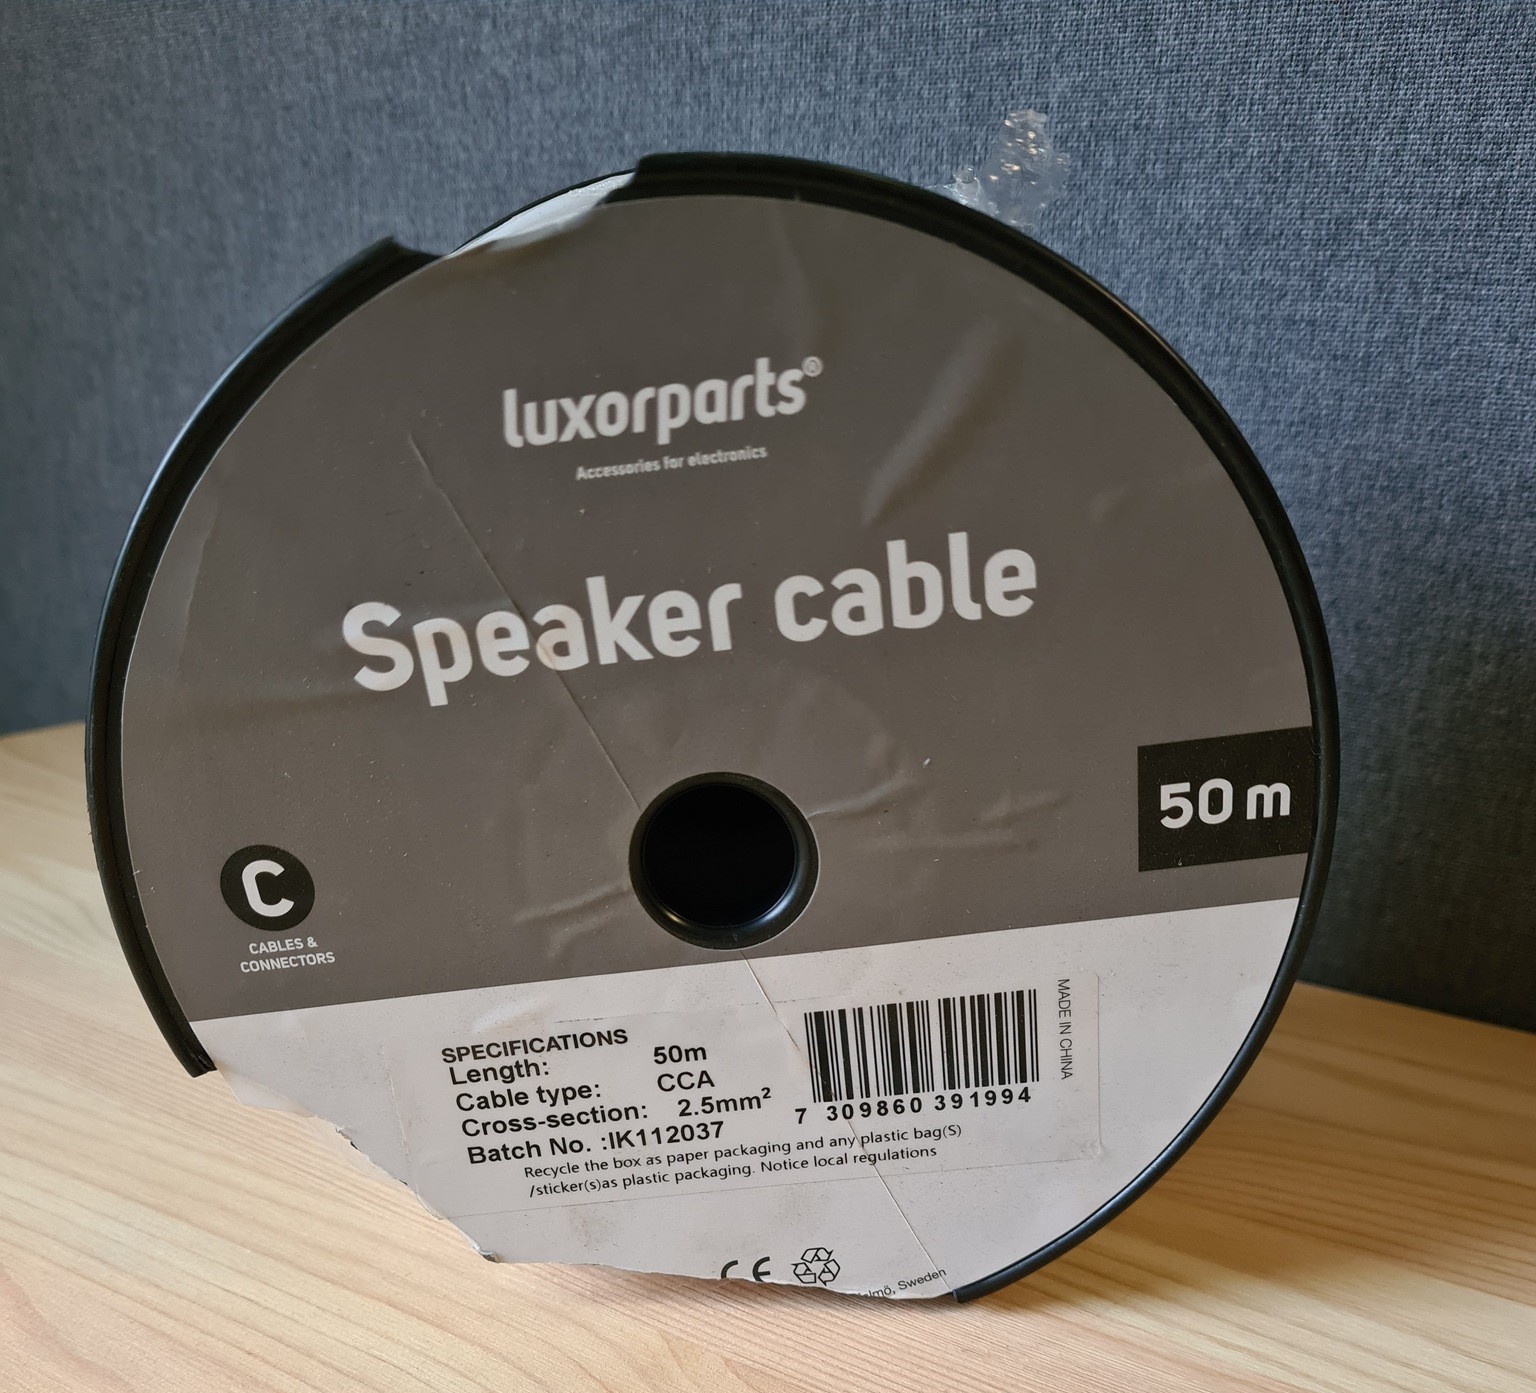 luxorparts speaker cable 50m